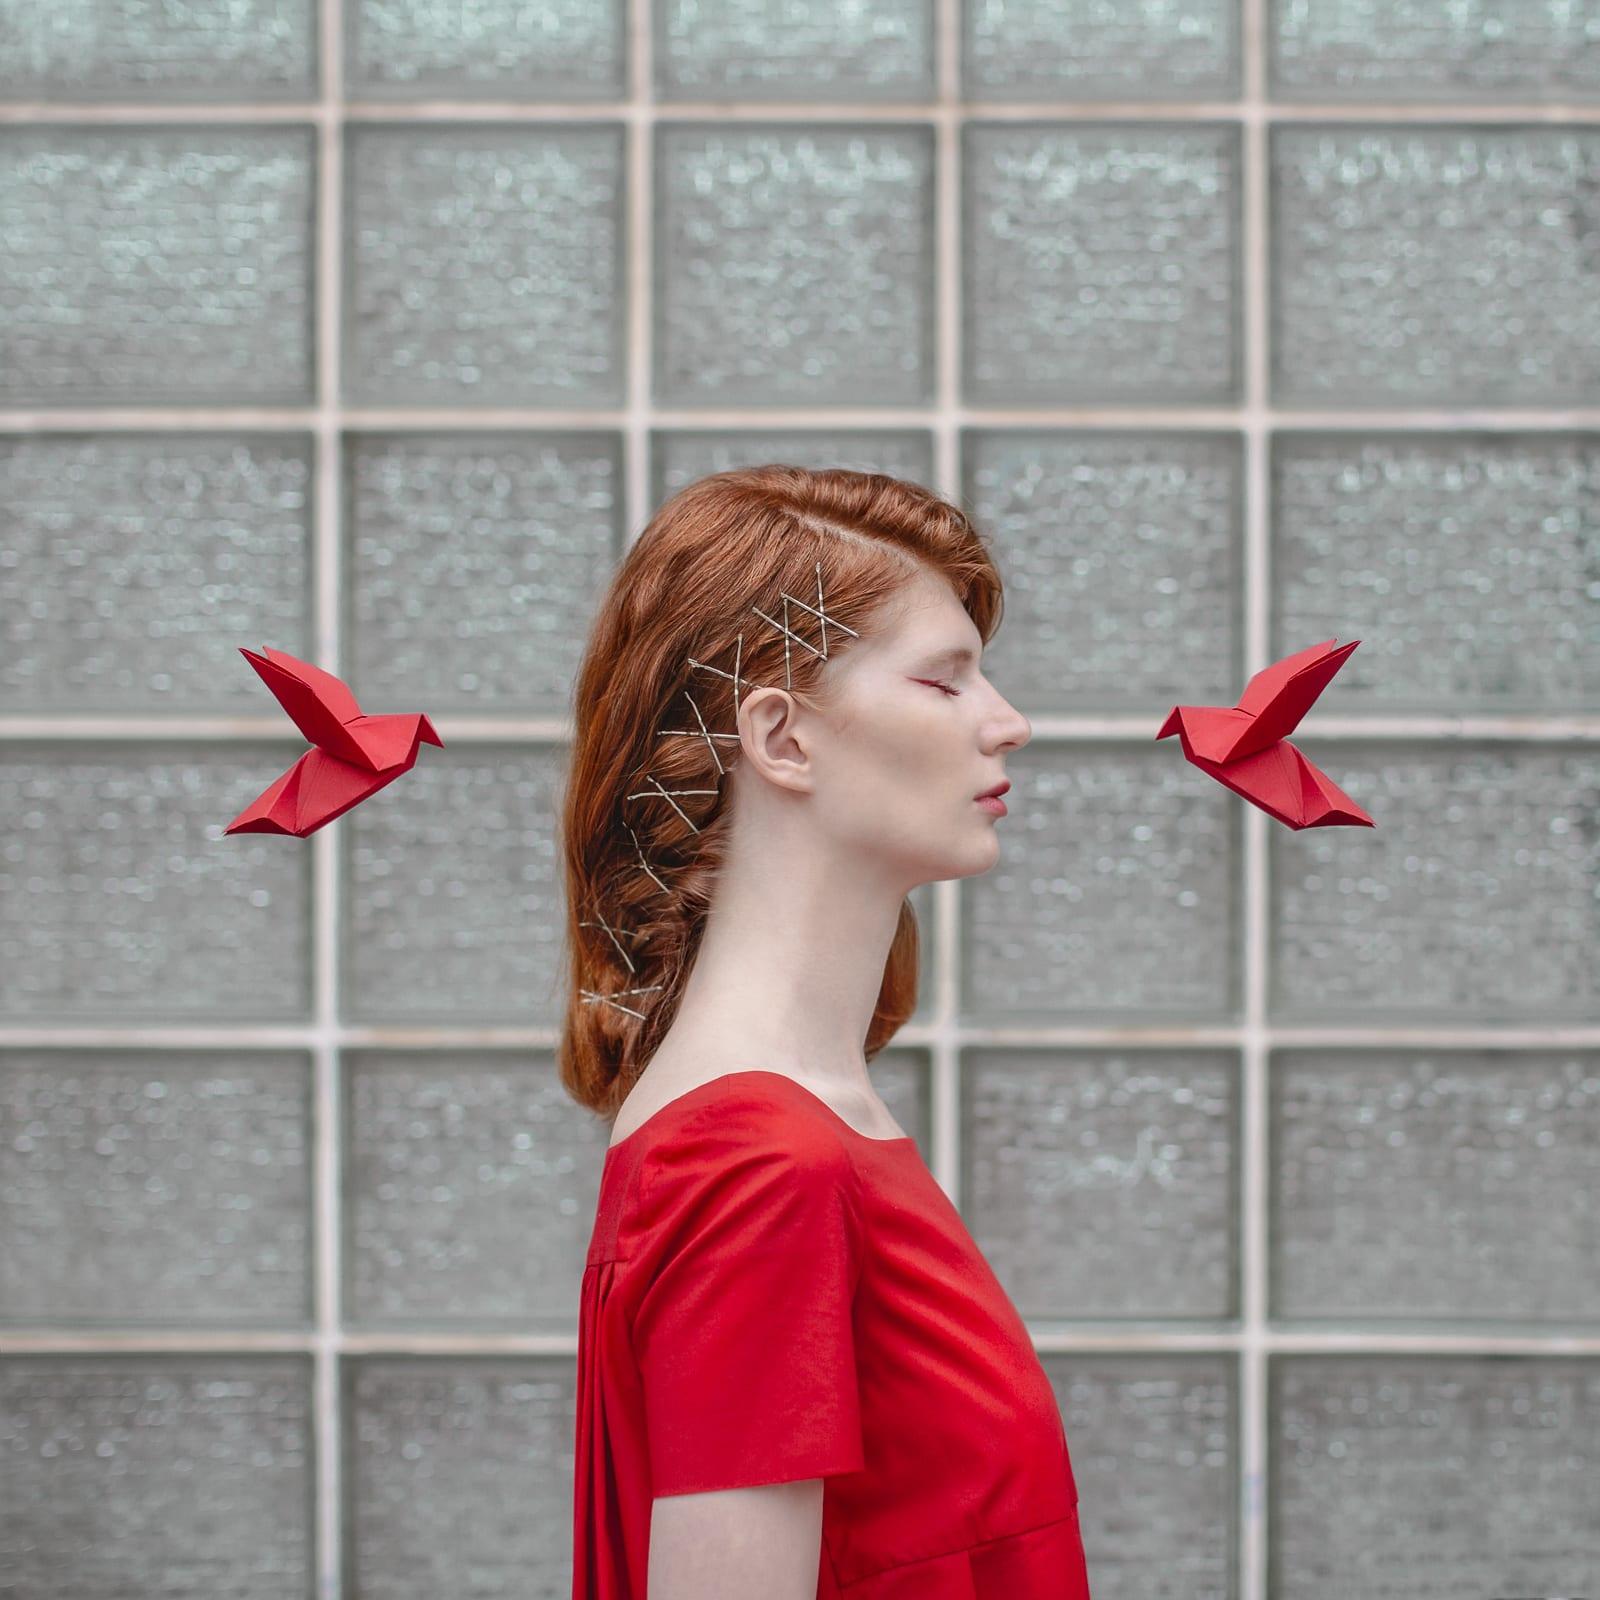 This beautifully vibrant red surreal portrait was shot in Barcelona. Dasha Pears uses origami birds to create a dialogue between the subject and her emotions. This is a limited edition color photograph. Number 1 of 5 is currently available, framed